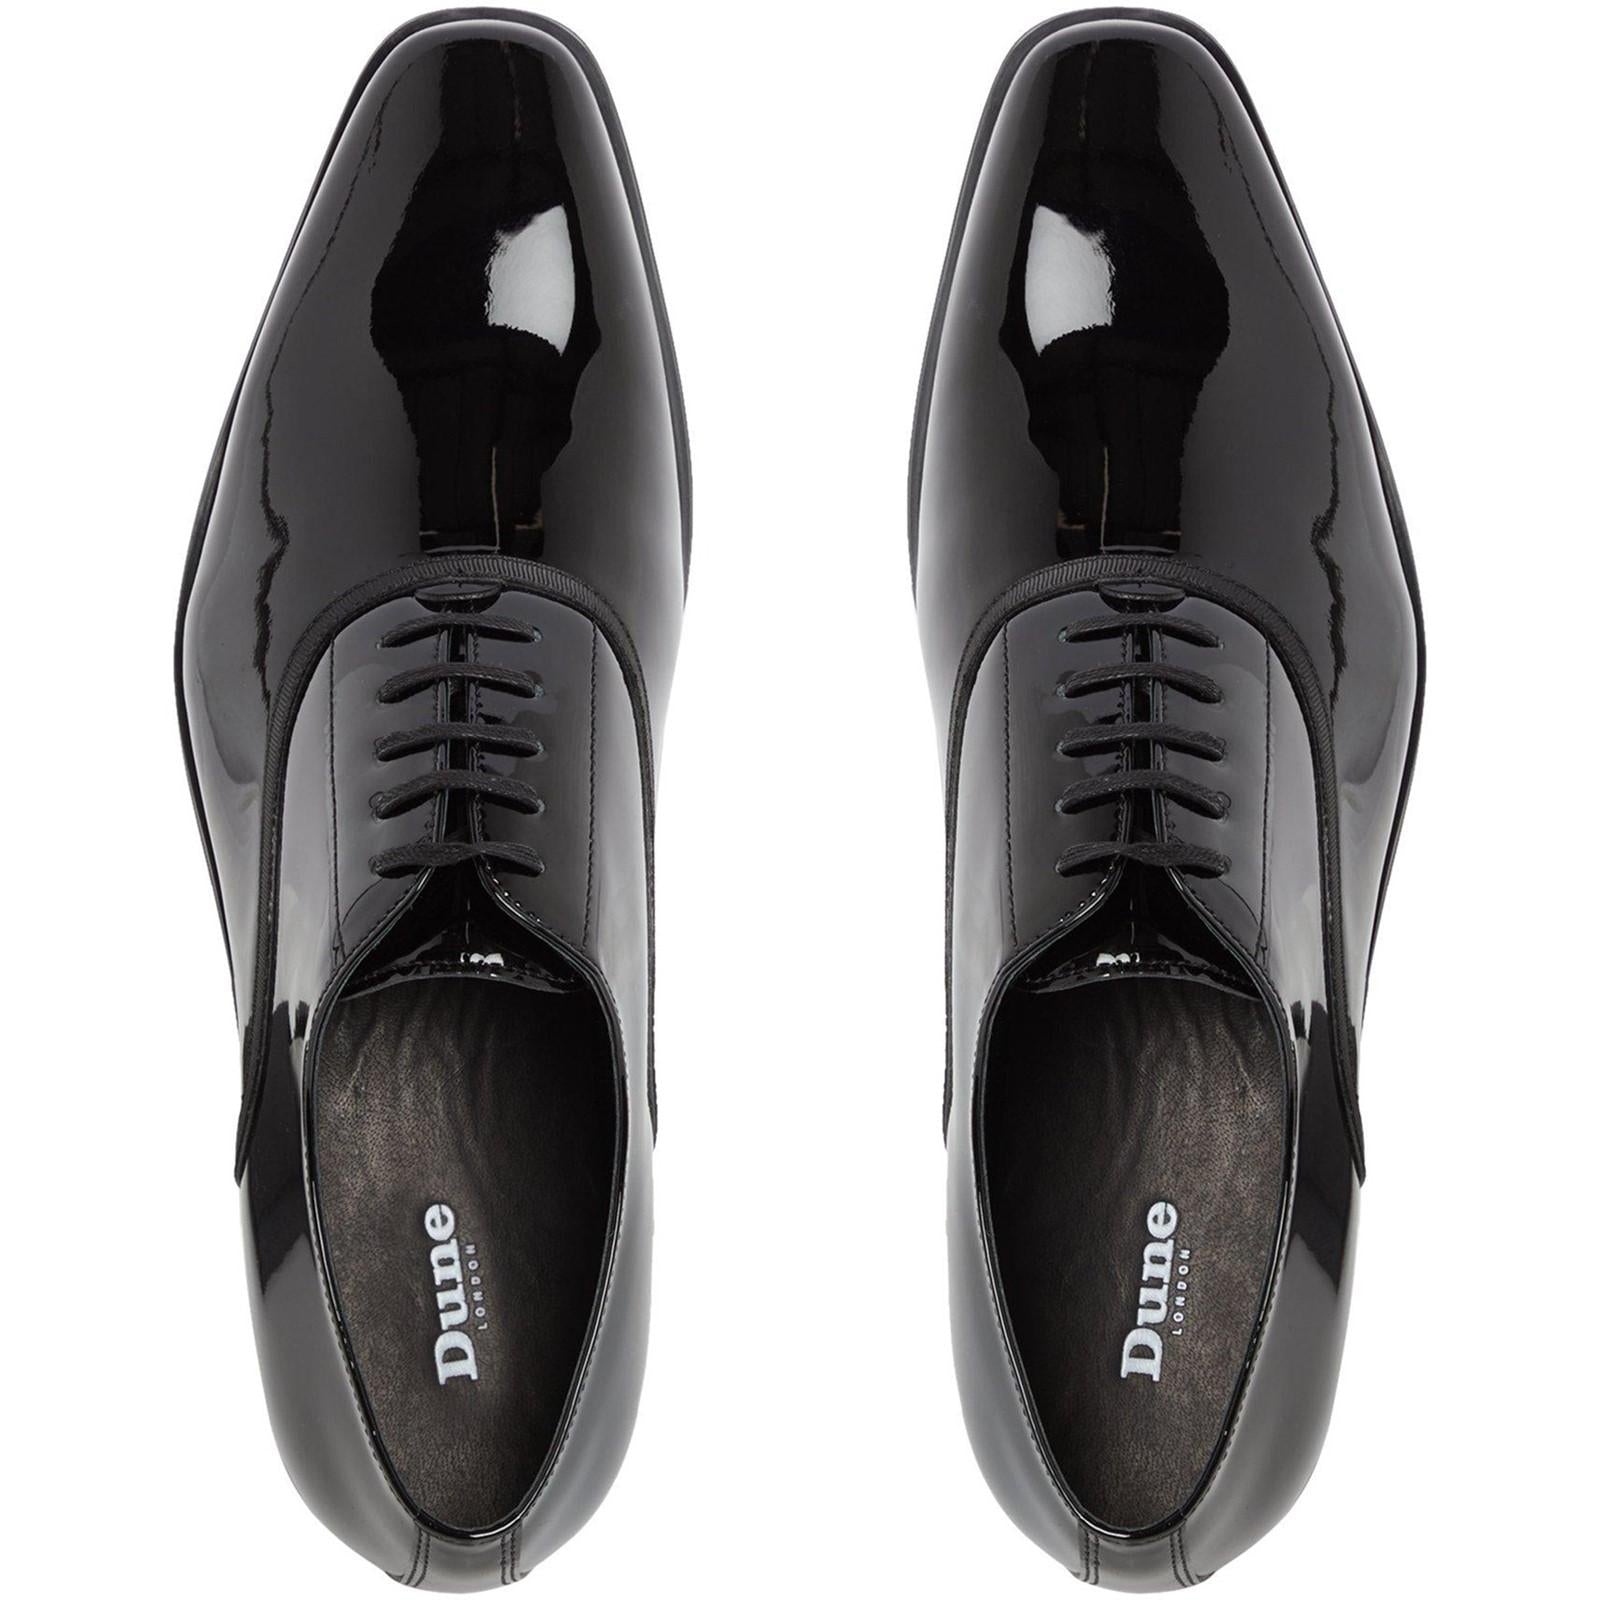 Dune London Swan Oxford Shoes